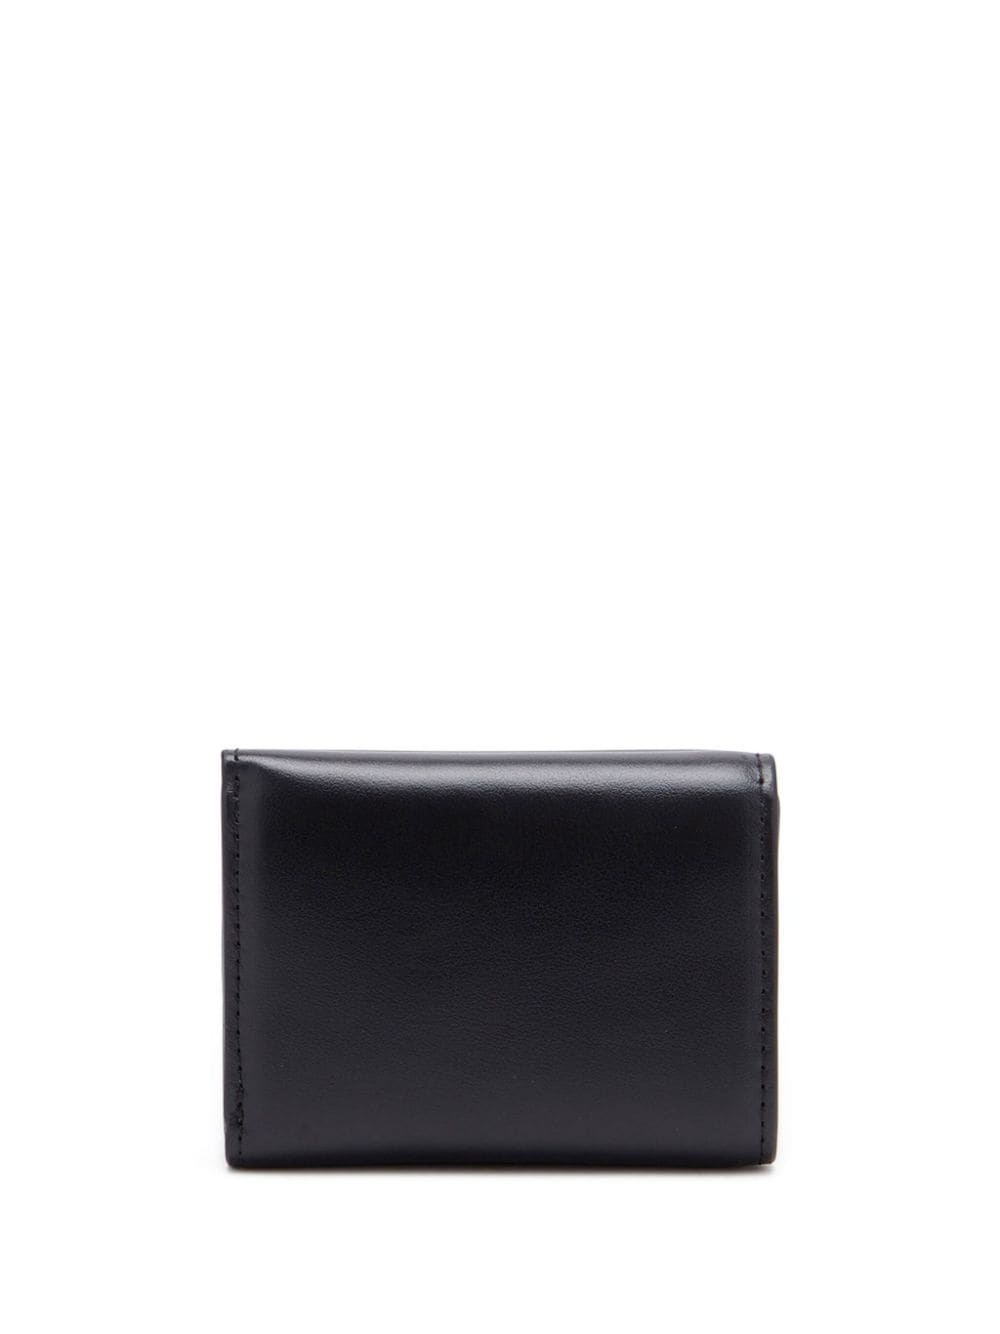 1dr leather wallet - 2